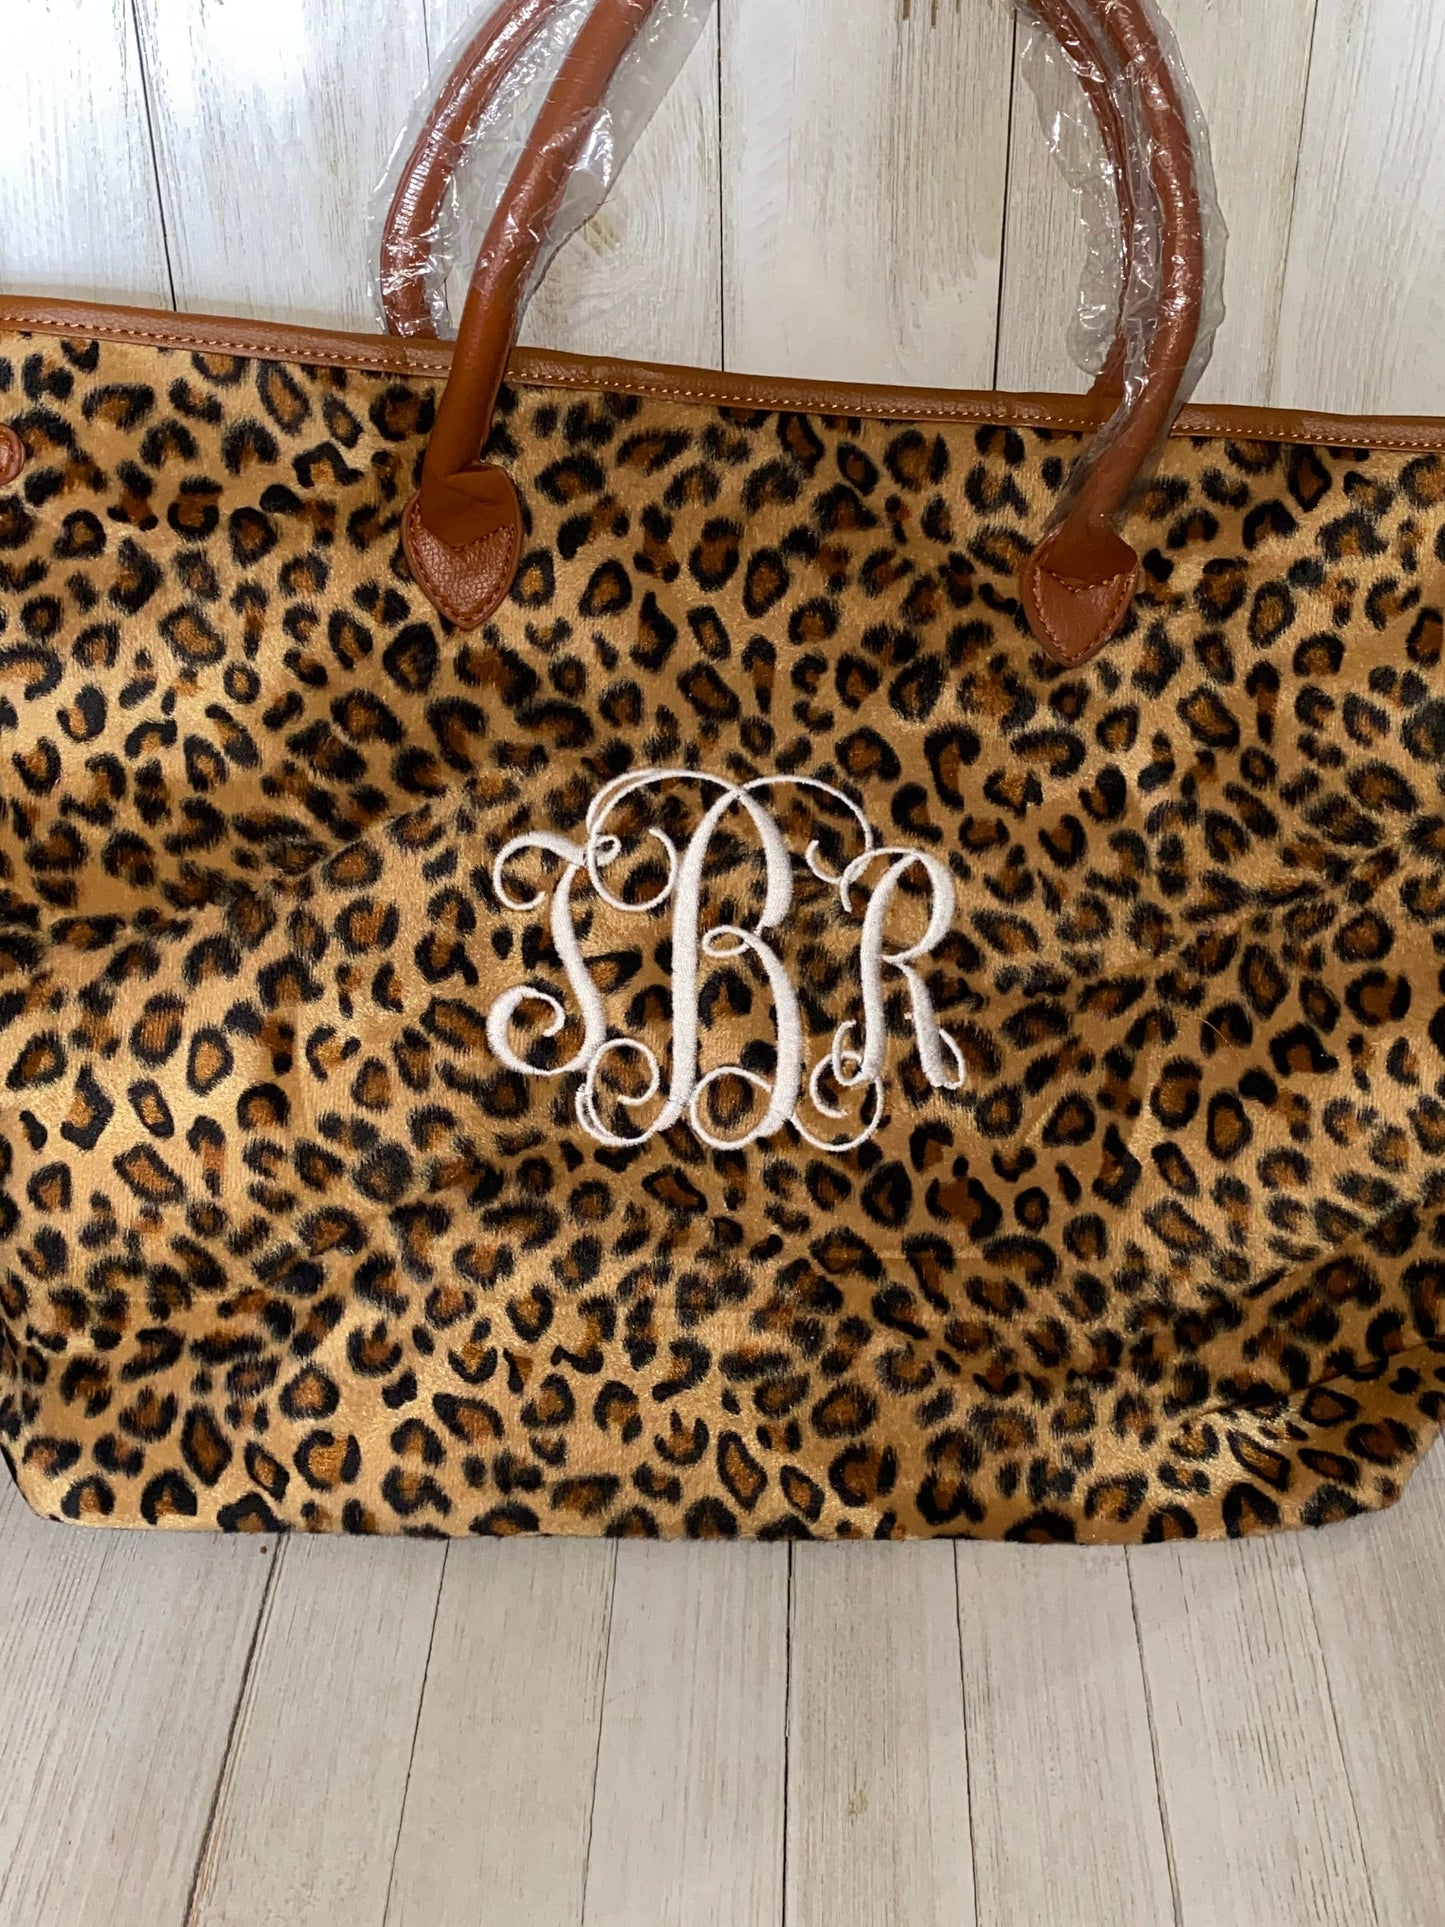 Leopard Tote, Purse, Travel Bag, Gift, Personalized, Embroidered